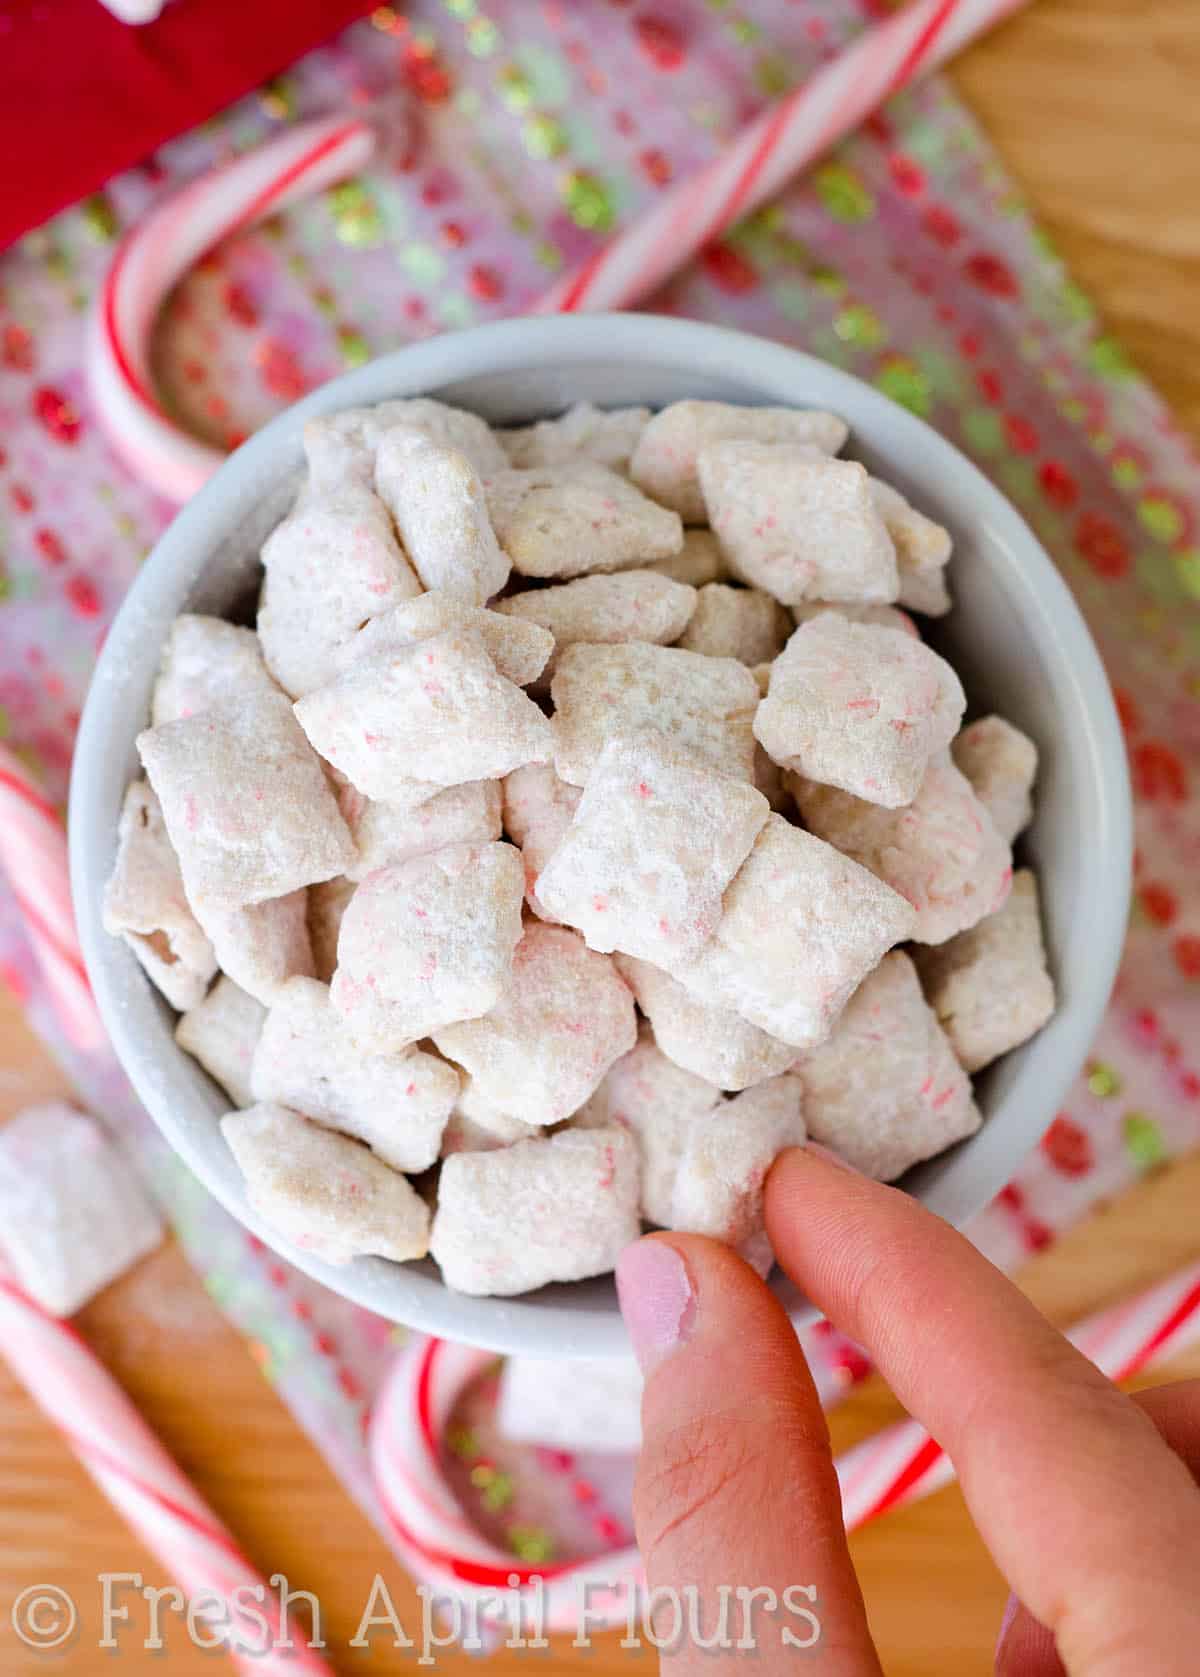 A bowl of candy cane puppy chow with fingers reaching in to taking a piece.